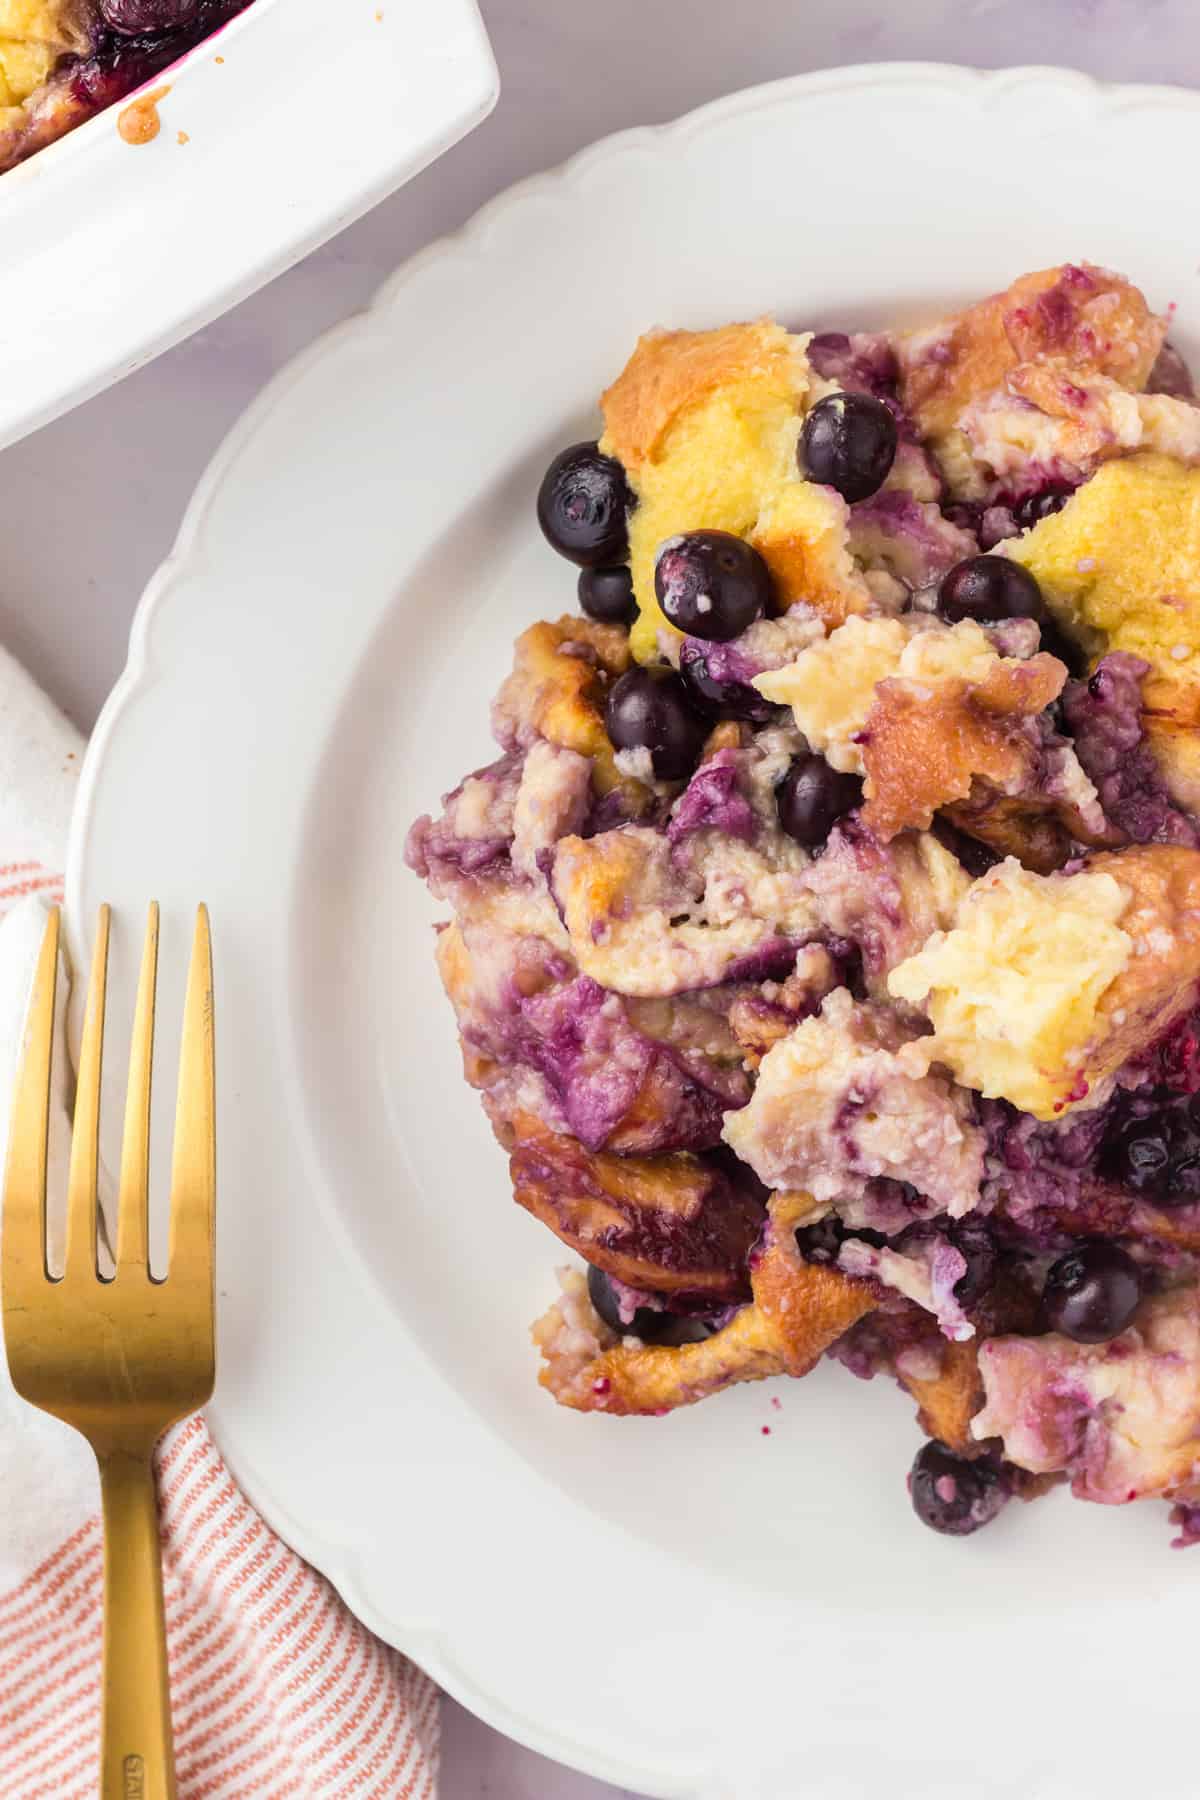 Blueberry lemon bread pudding scooped onto a plate.